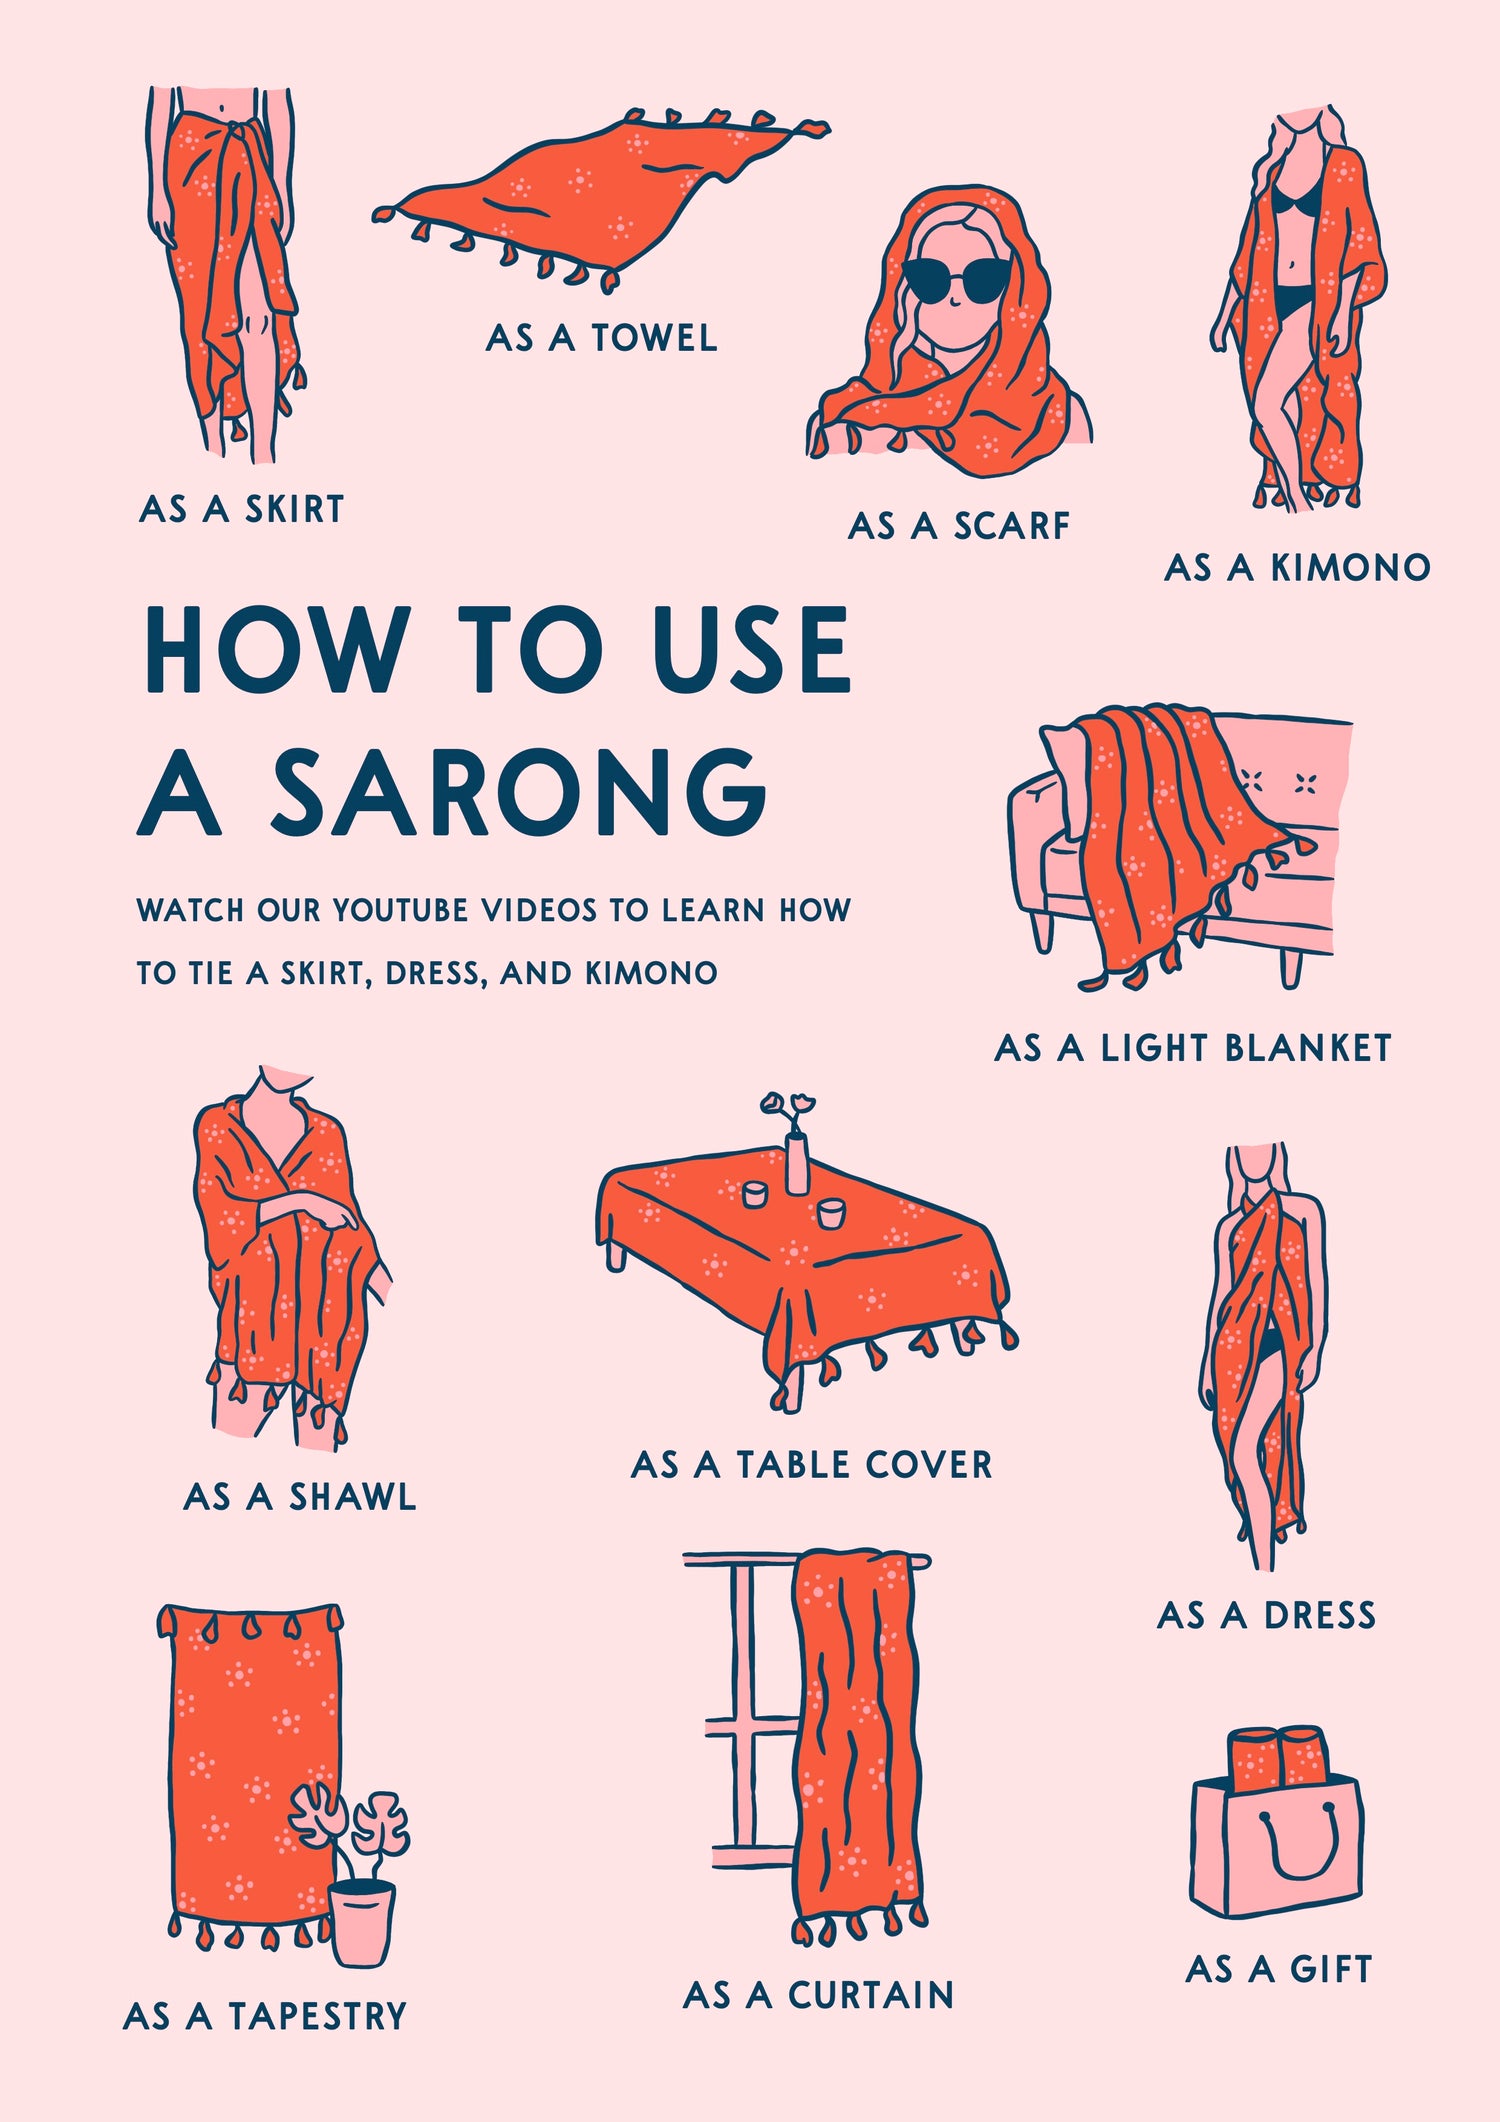 A chart showing 11 different ways that a sarong can be used - as a skirt, a towel, a scarf, a beach kimono, a light blanket, a shawl, a table cover, a dress, a tapestry, a curtain, or given as a gift